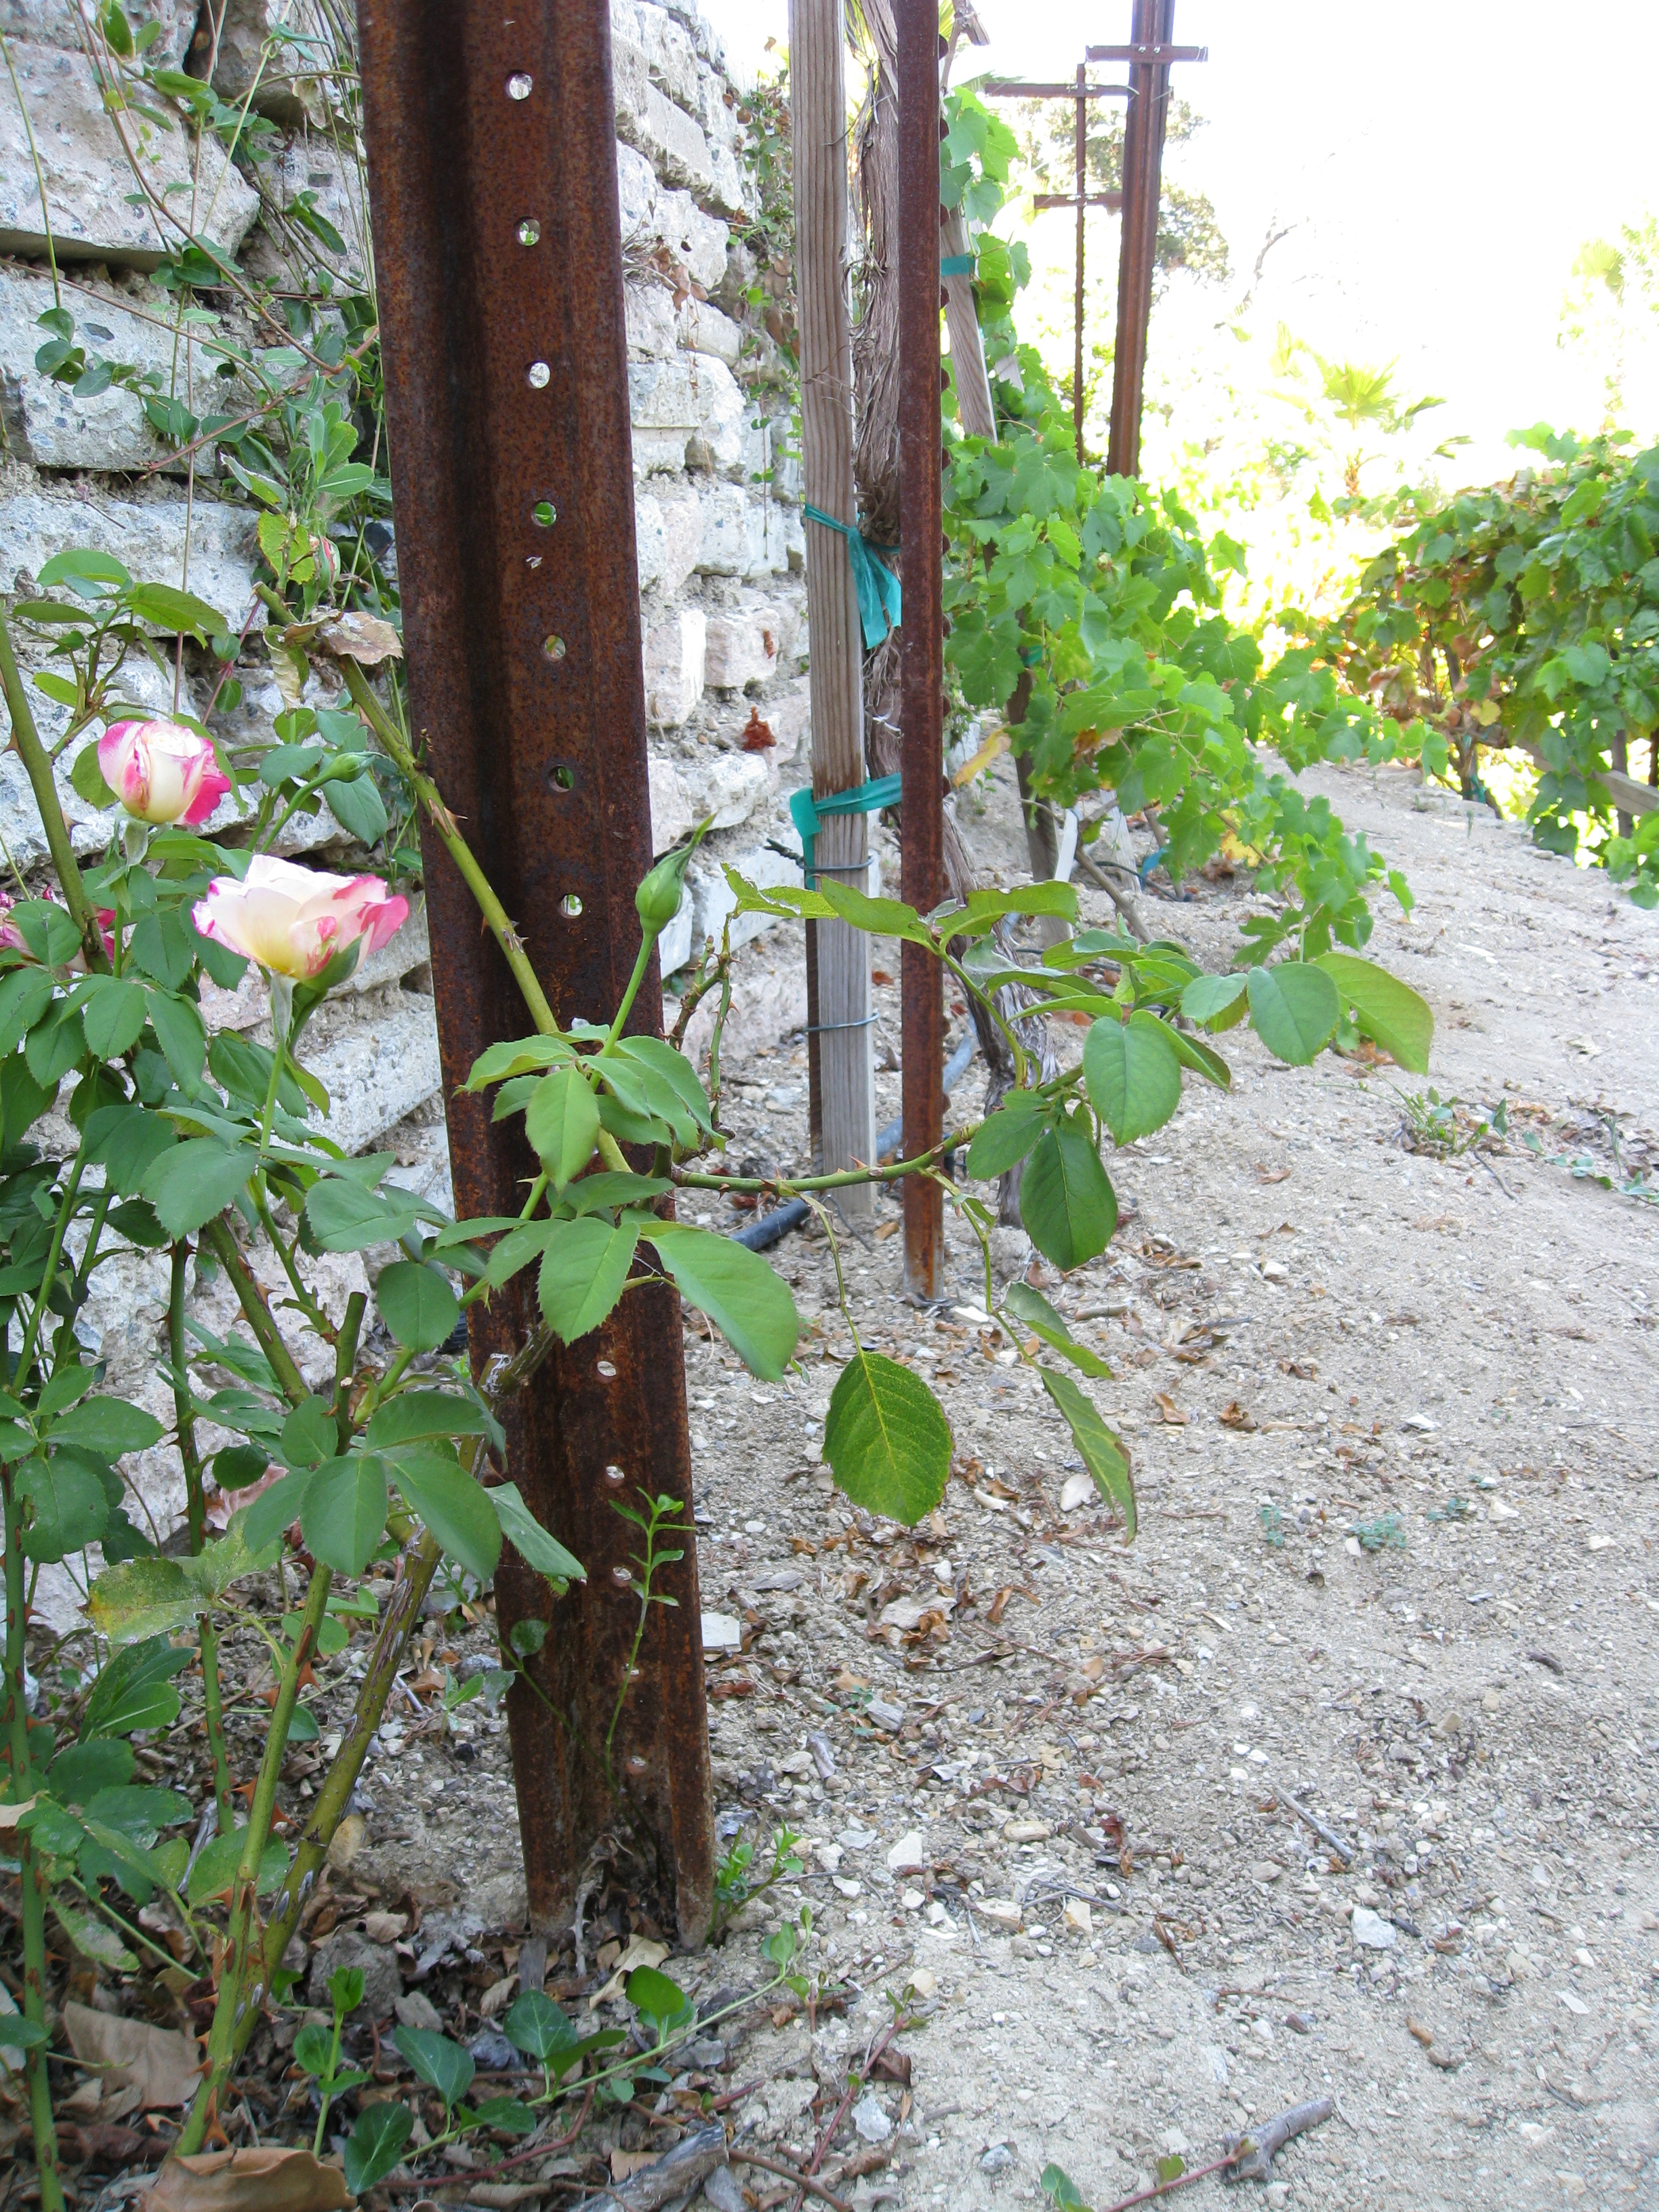 Clive plants roses at the end of each row of grapes. Roses let farmers know in advance when powdery mildew has arrived.